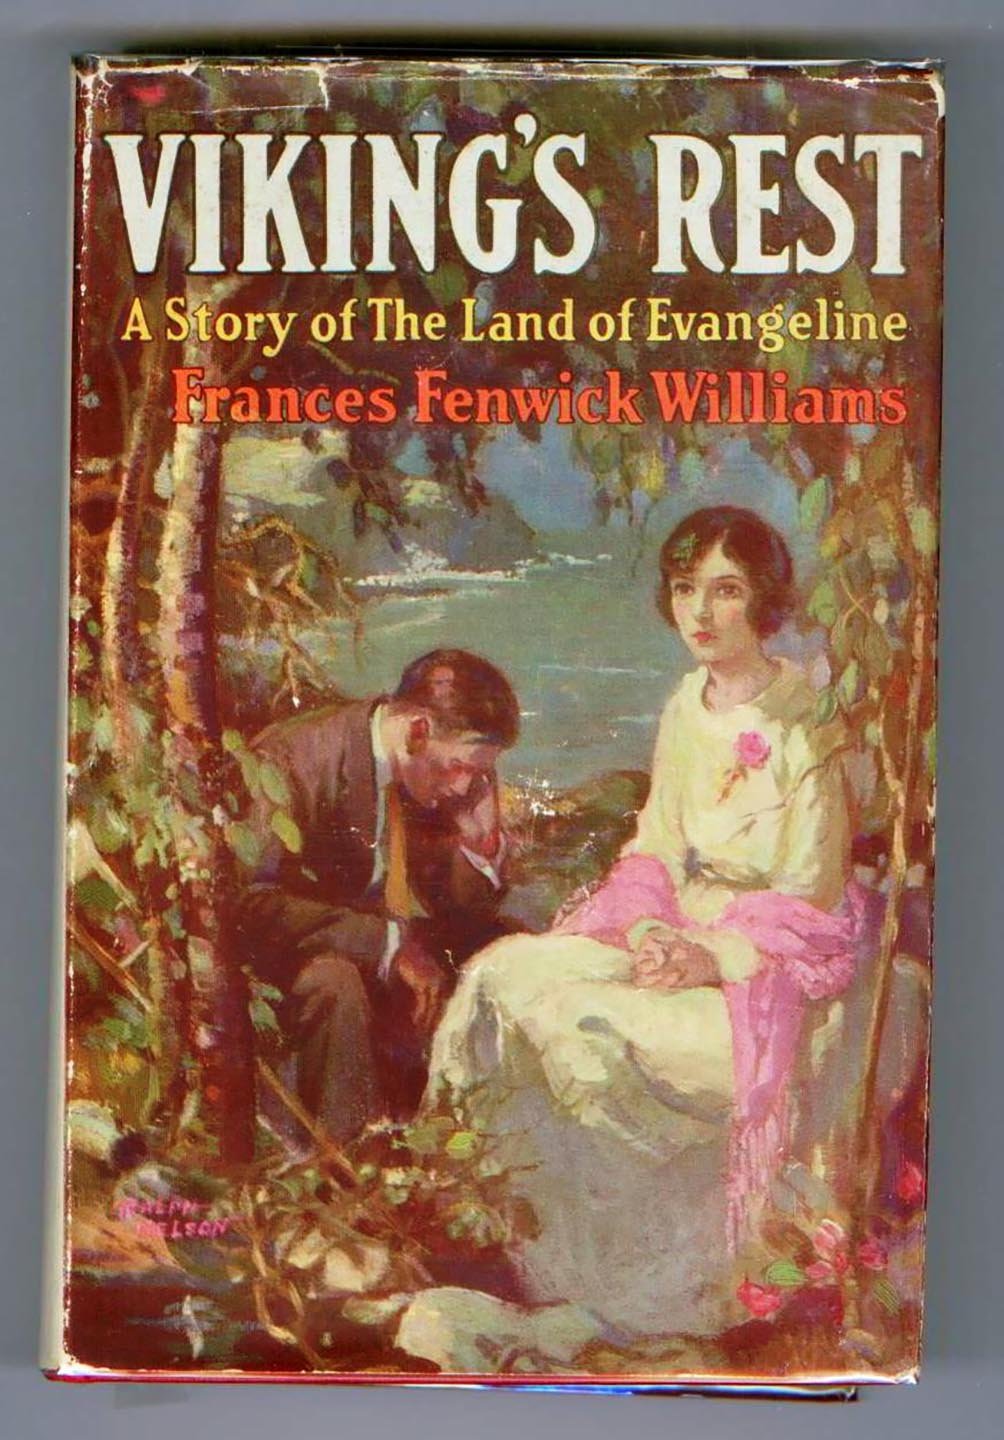 Viking's Rest.  A Story of The Land of Evangeline